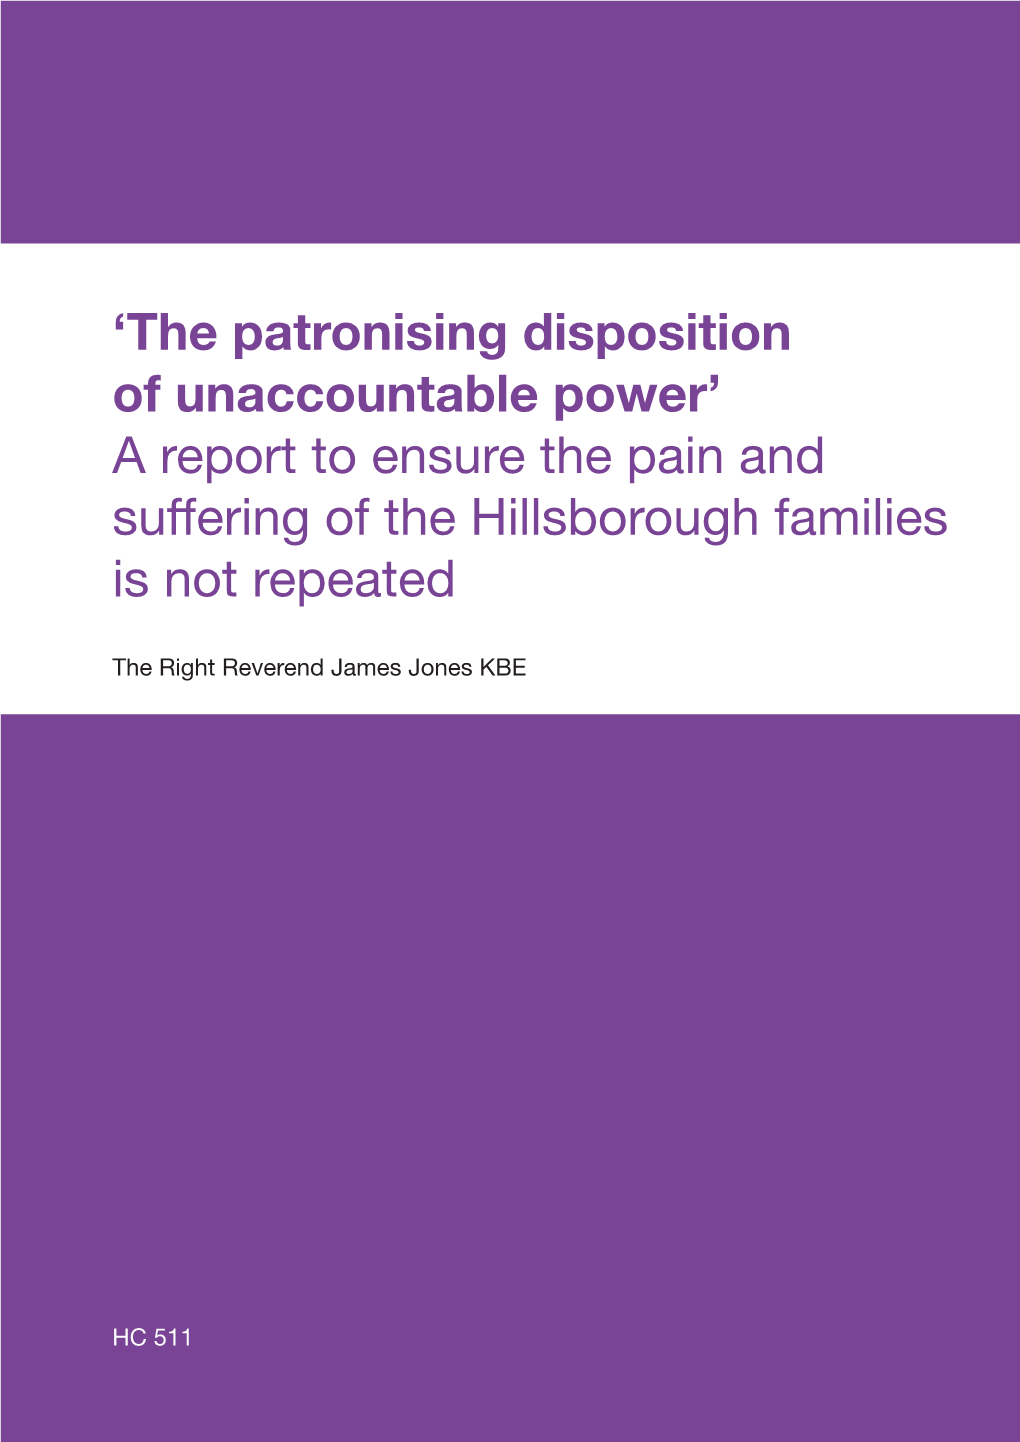 'The Patronising Disposition of Unaccountable Power' a Report to Ensure the Pain and Suffering of the Hillsborough Families